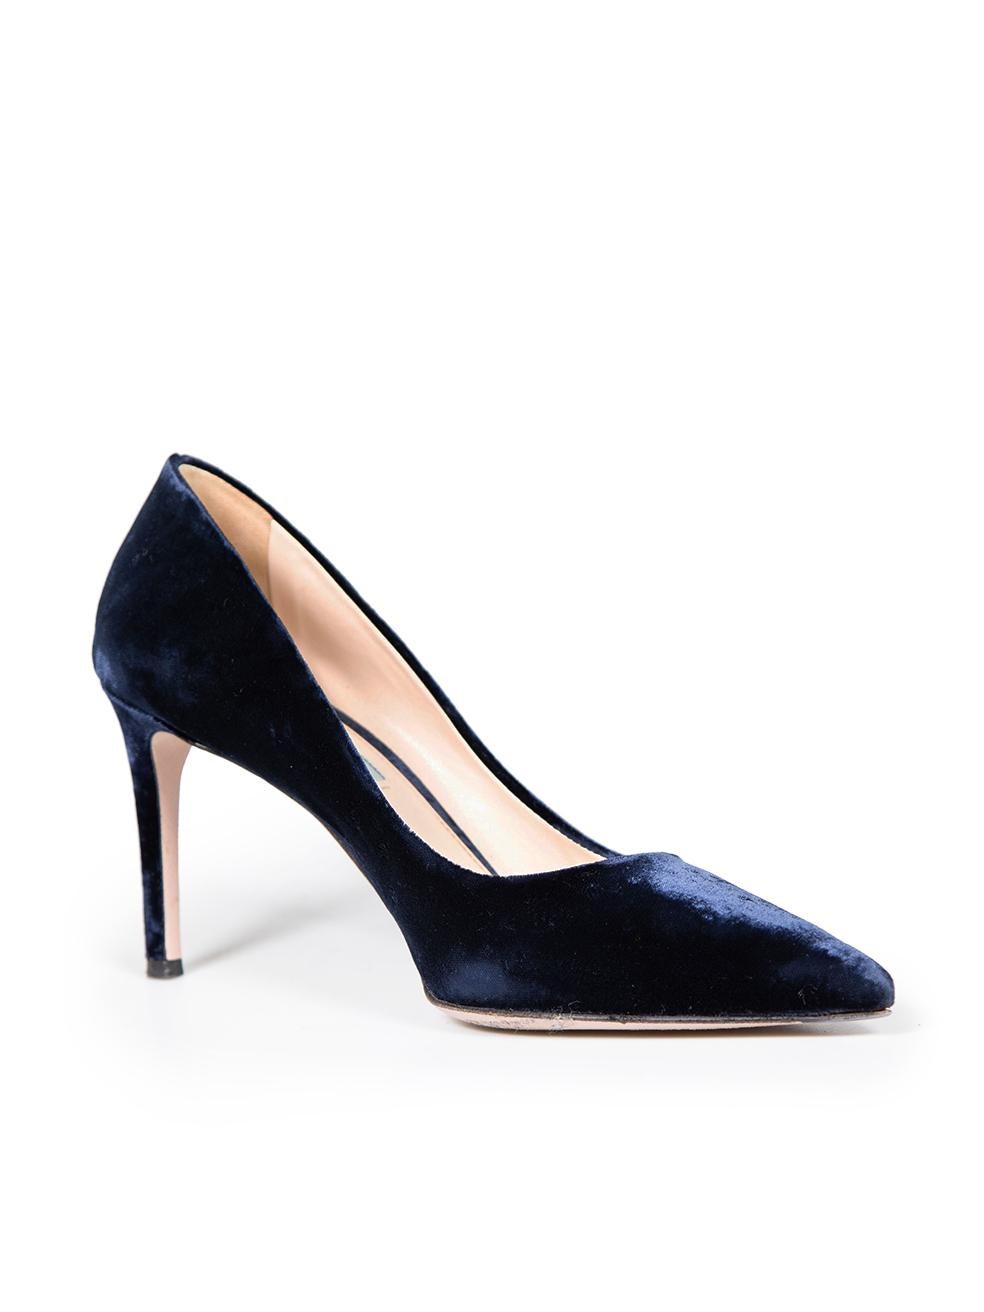 CONDITION is Very good. Minimal wear to pumps is evident. Minimal abrasion to tip of right shoe and heel stem of both shoes on this used Prada designer resale item. This item comes with original dust bags.
 
 
 
 Details
 
 
 Navy
 
 Velvet
 
